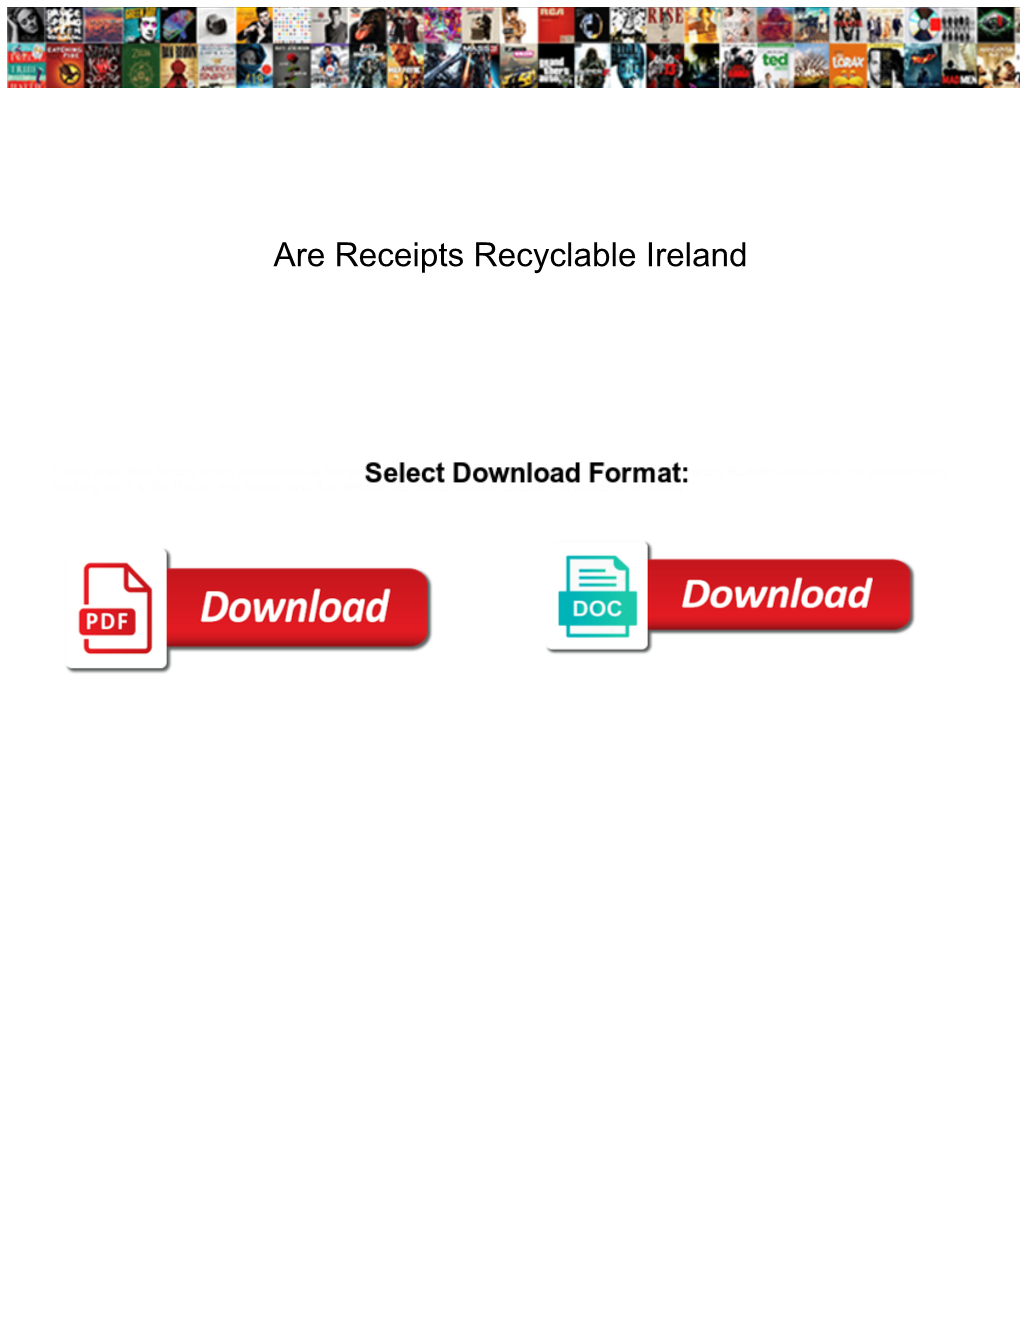 Are Receipts Recyclable Ireland